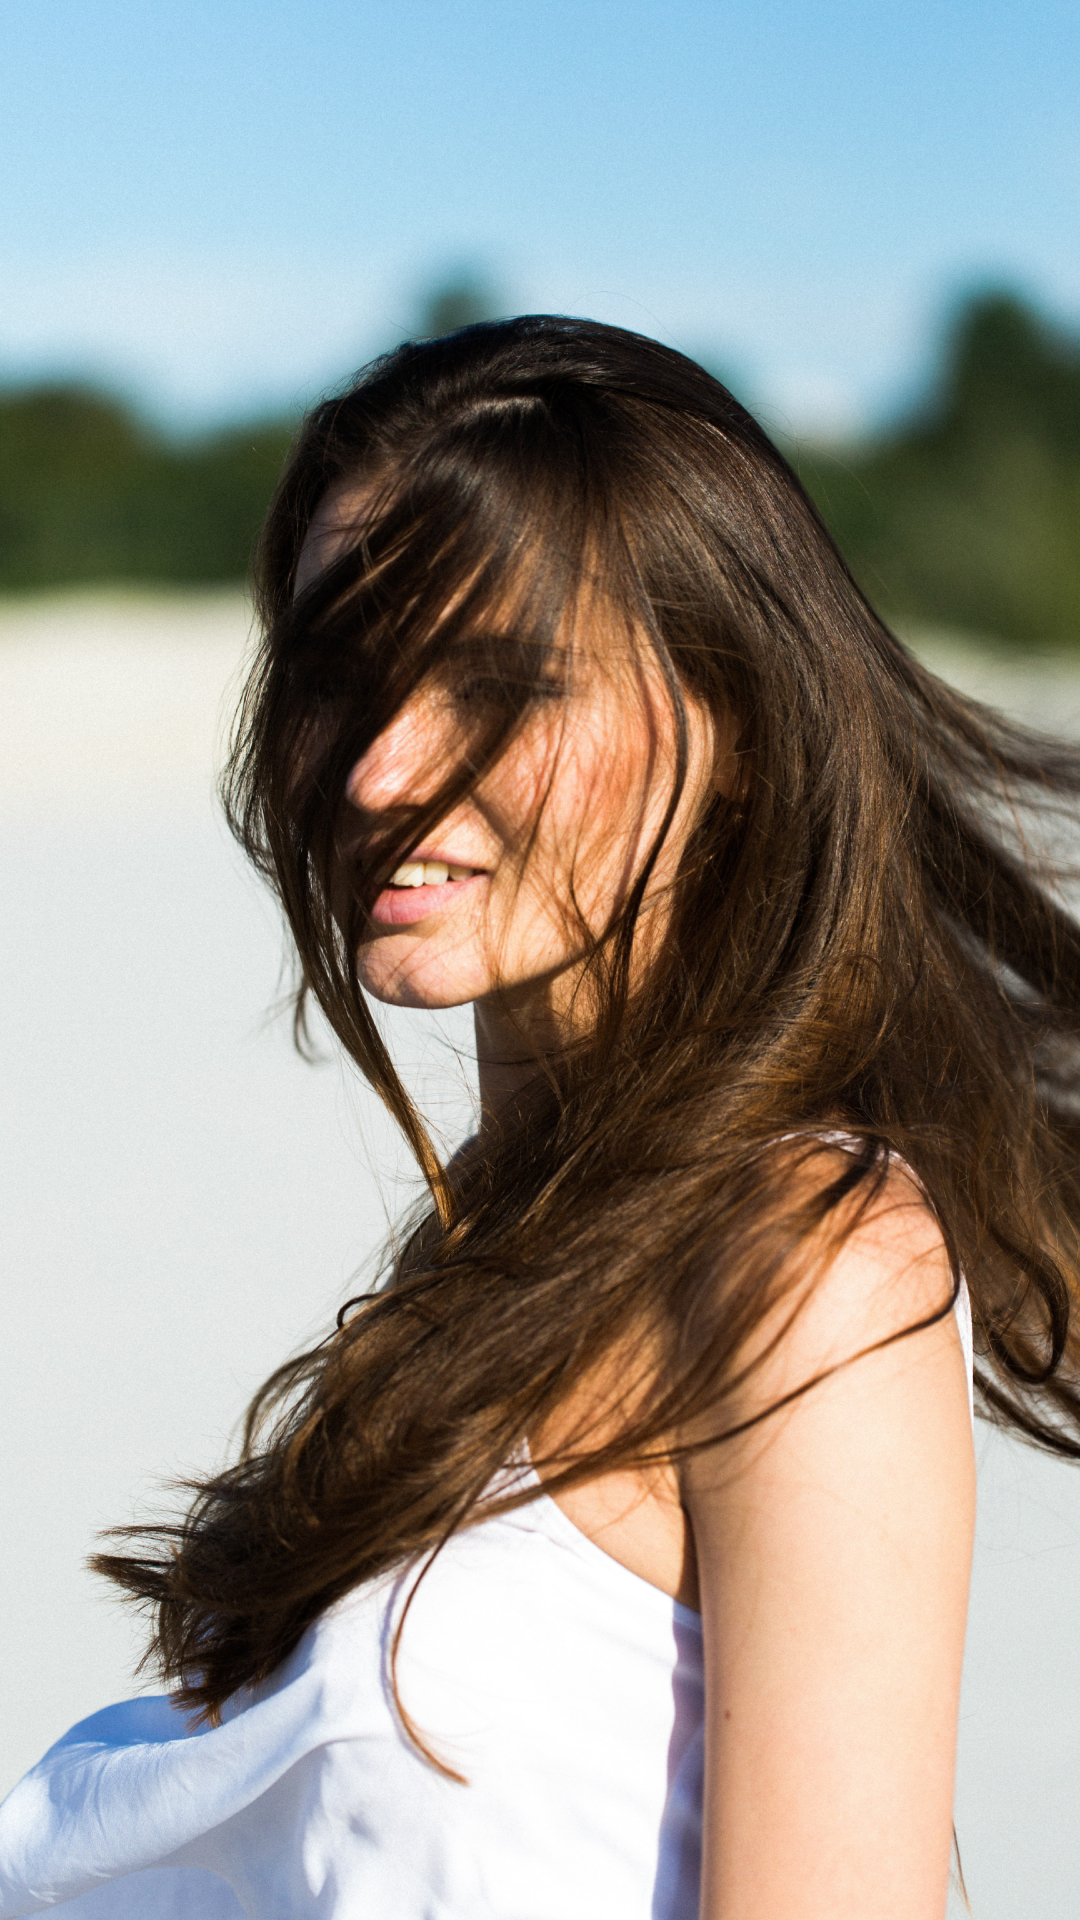 5 vital tips to maintain hydration in your hair during summers
